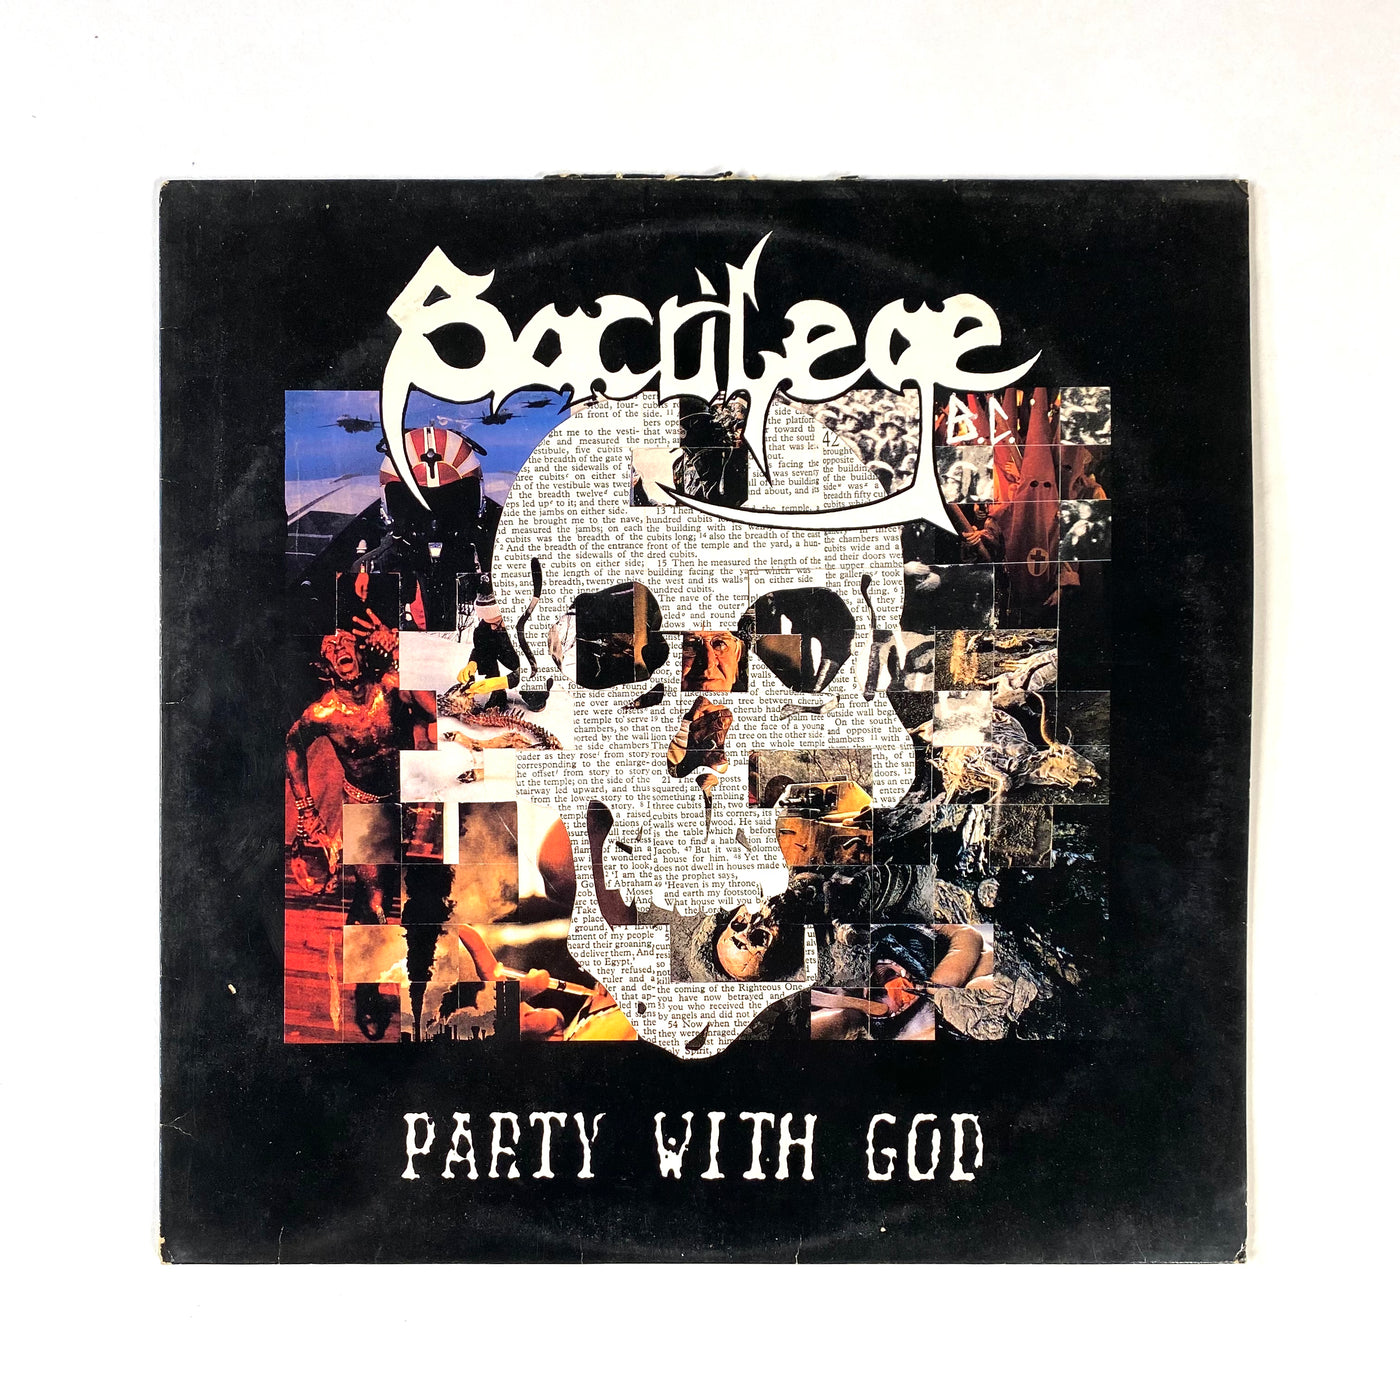 Sacrilege B.C. - Party With God